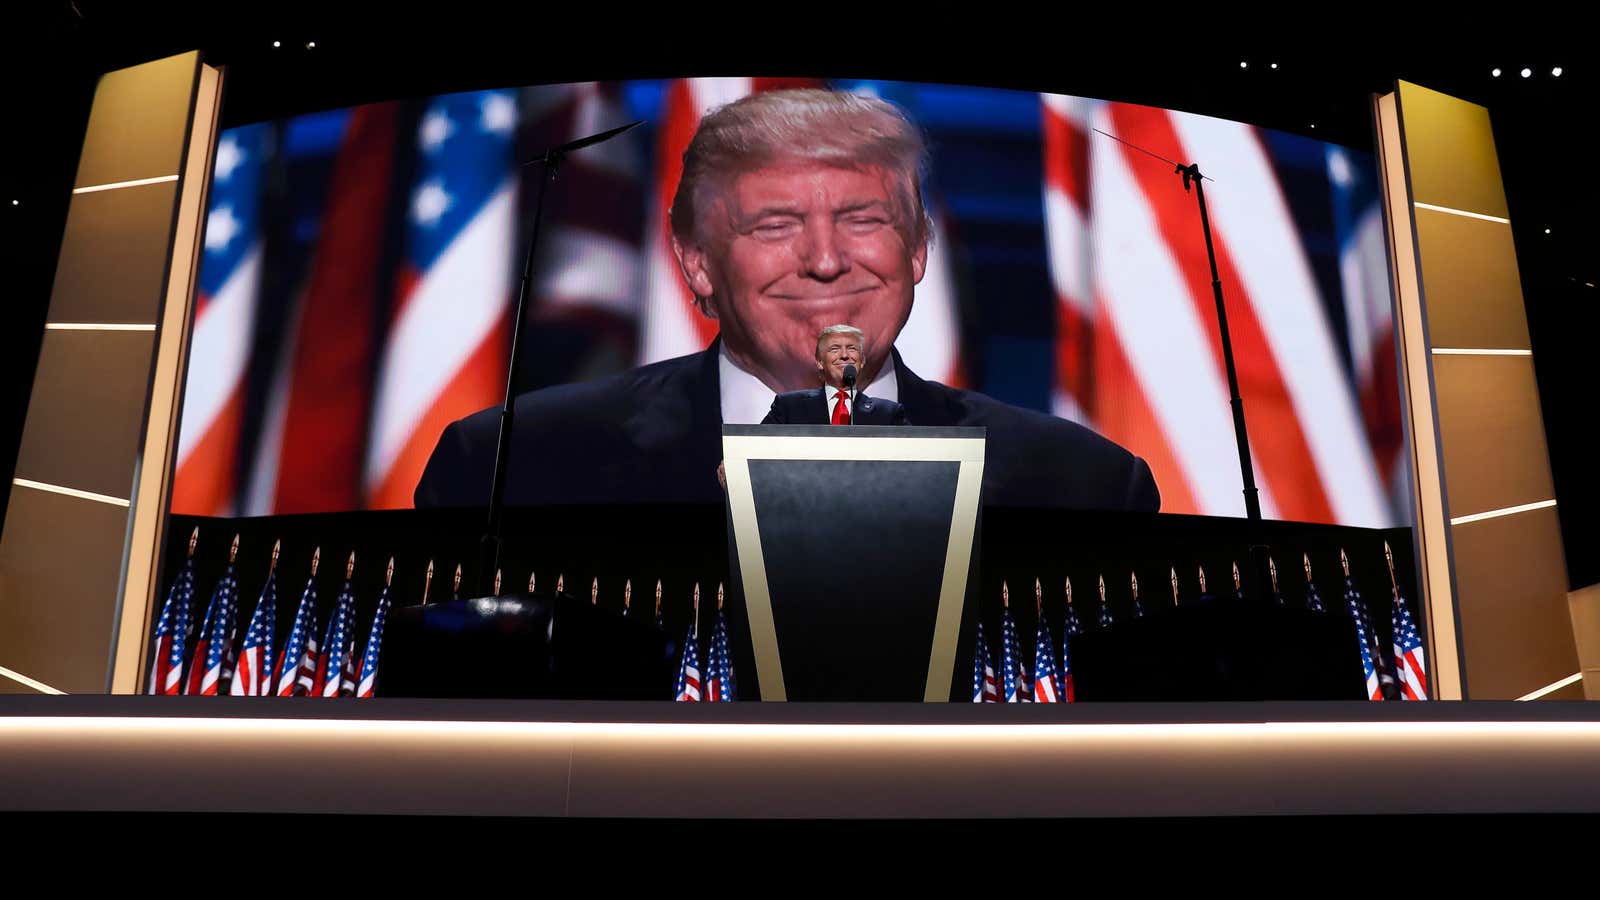 Donald Trump addresses the Republican National Convention in Cleveland.